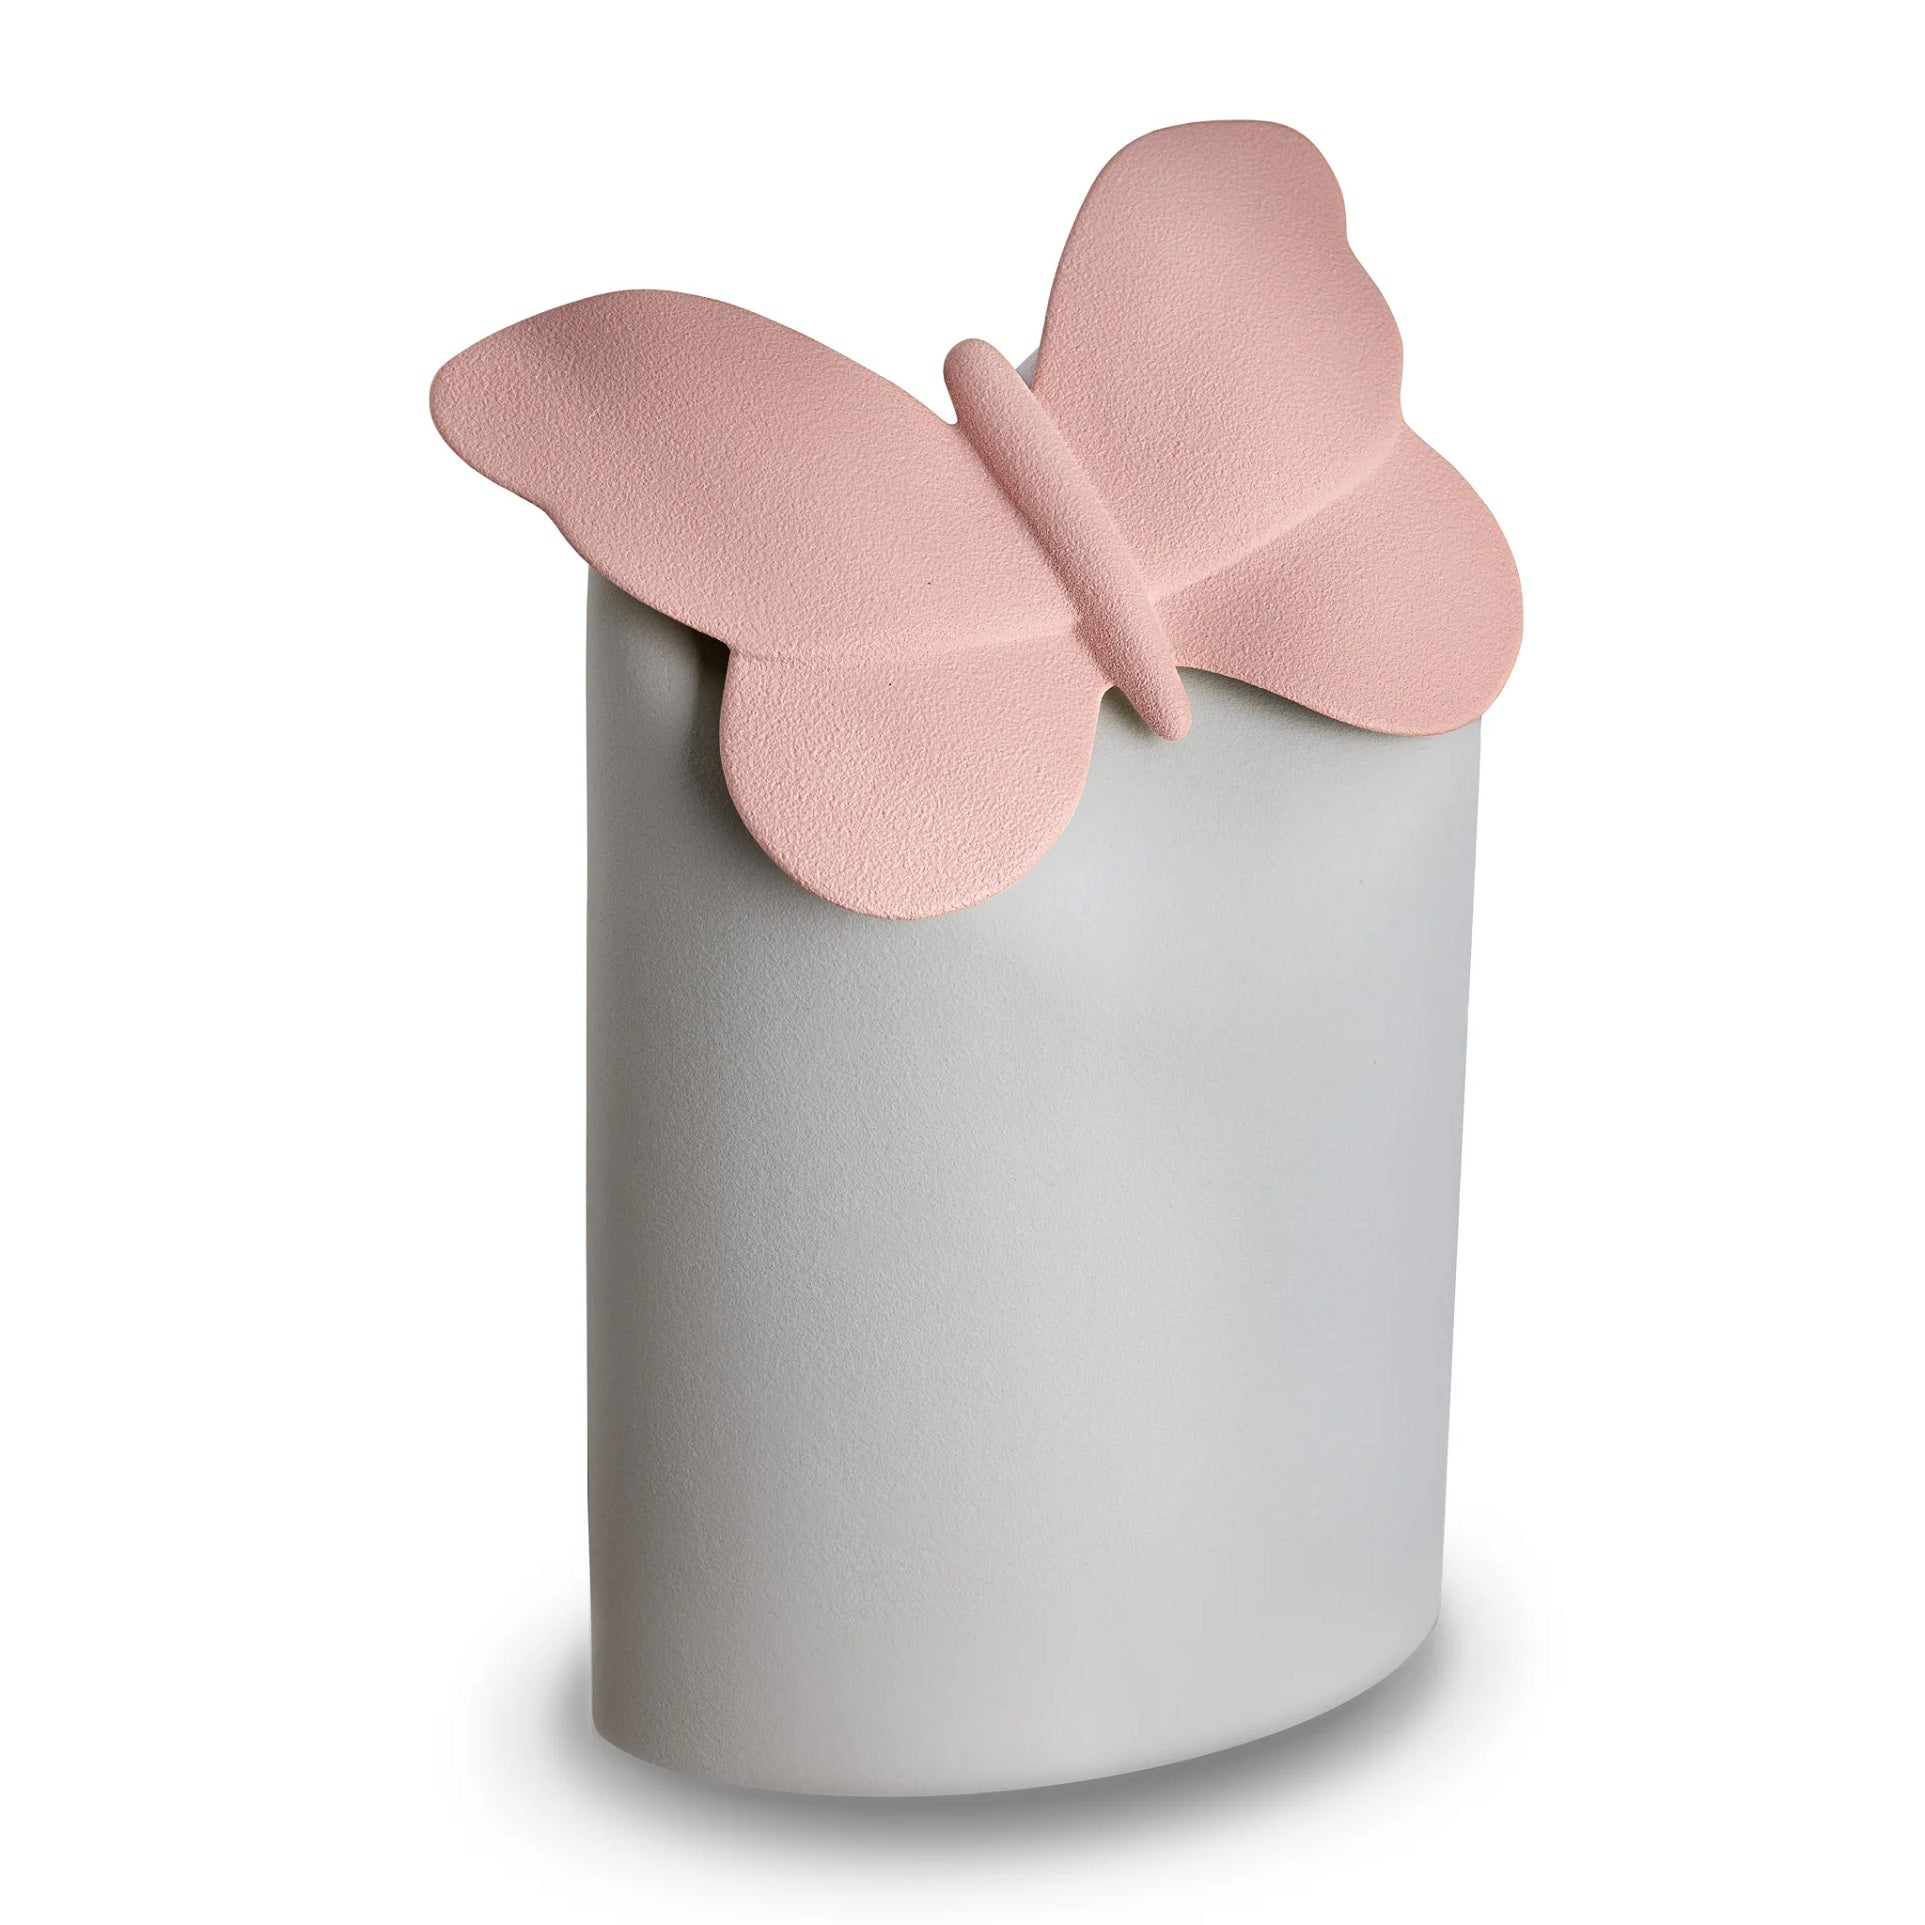 Pink butterfly atop white porcelain vessel urn